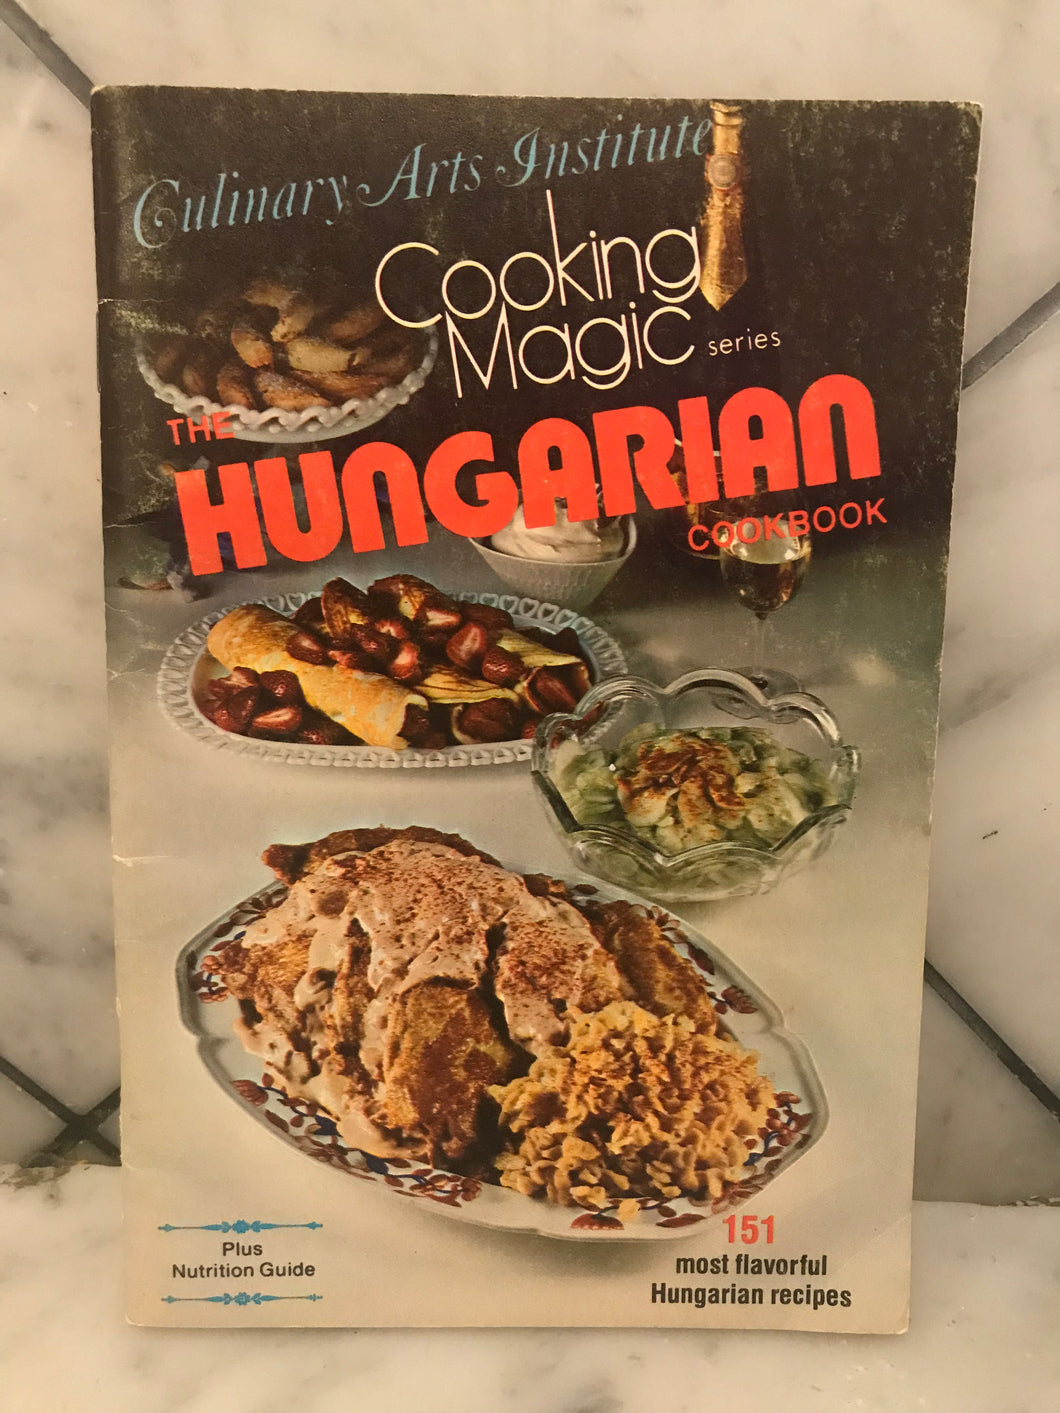 Culinary Arts Institue Cooking Magic Series, The Hungarian Cookbook